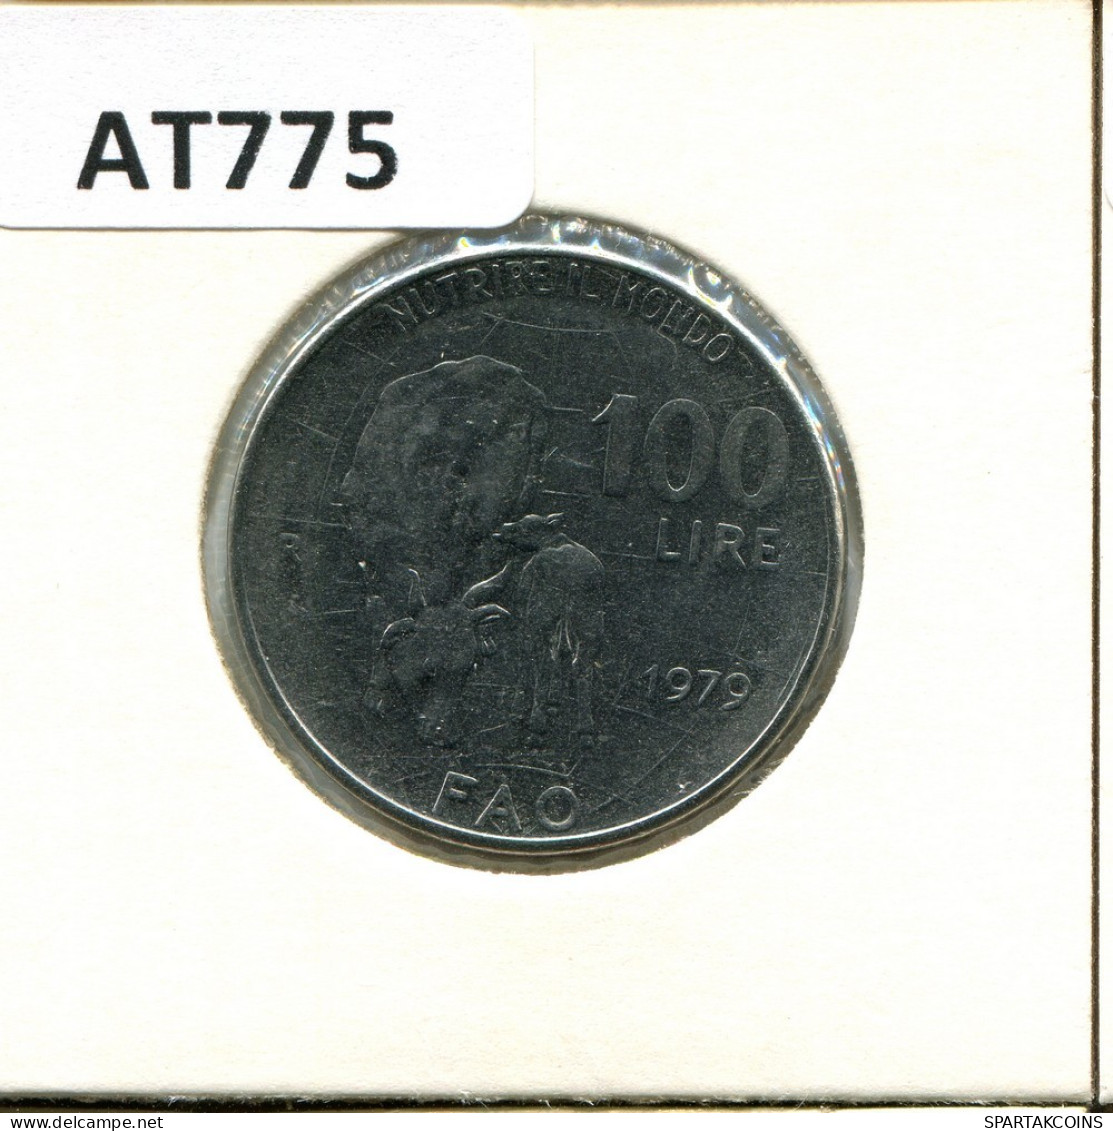 100 LIRE 1979 ITALY Coin #AT775.U.A - 100 Lire